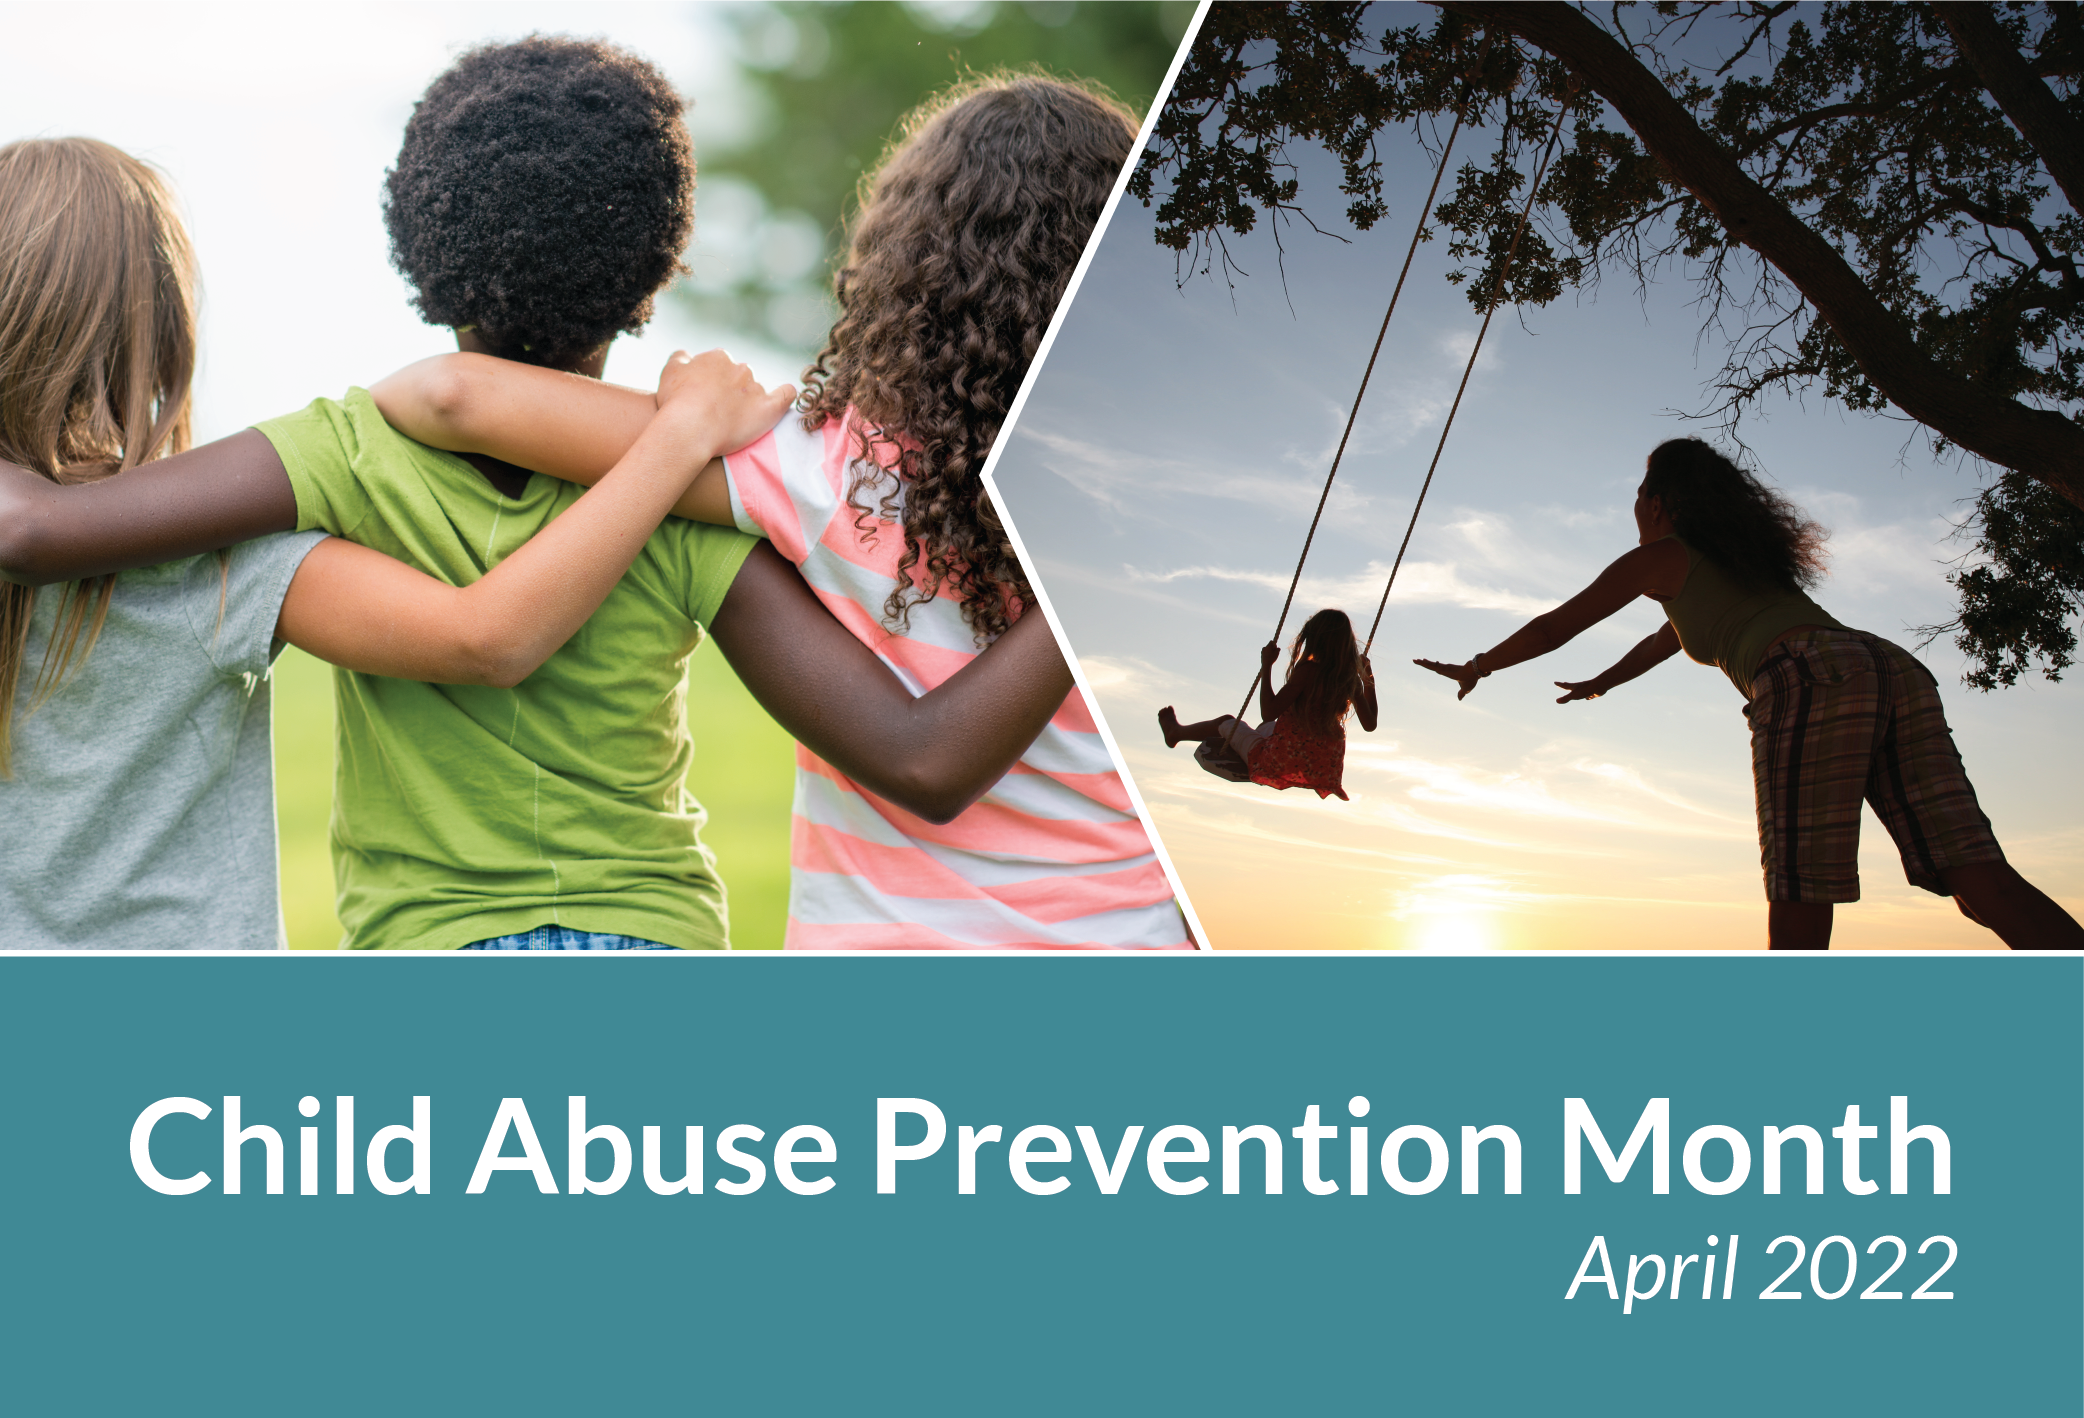 **2022 Child Abuse Prevention Month Resources